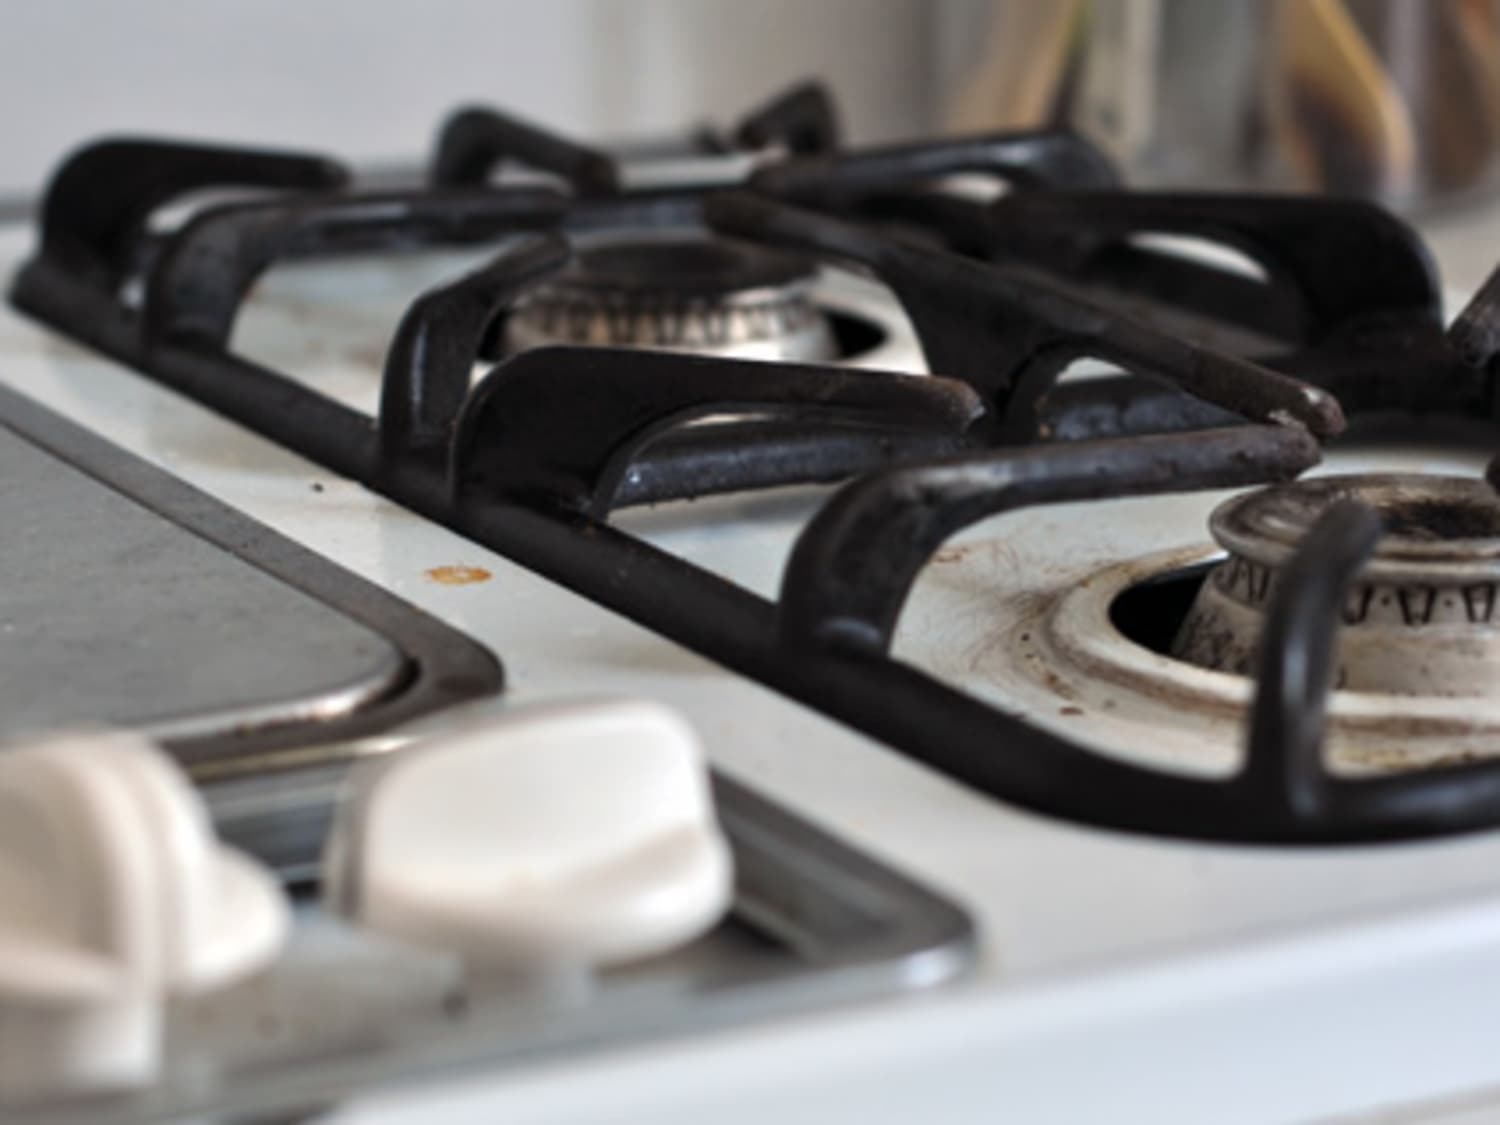 What's a BTU and How Many Should Your Stove Have?